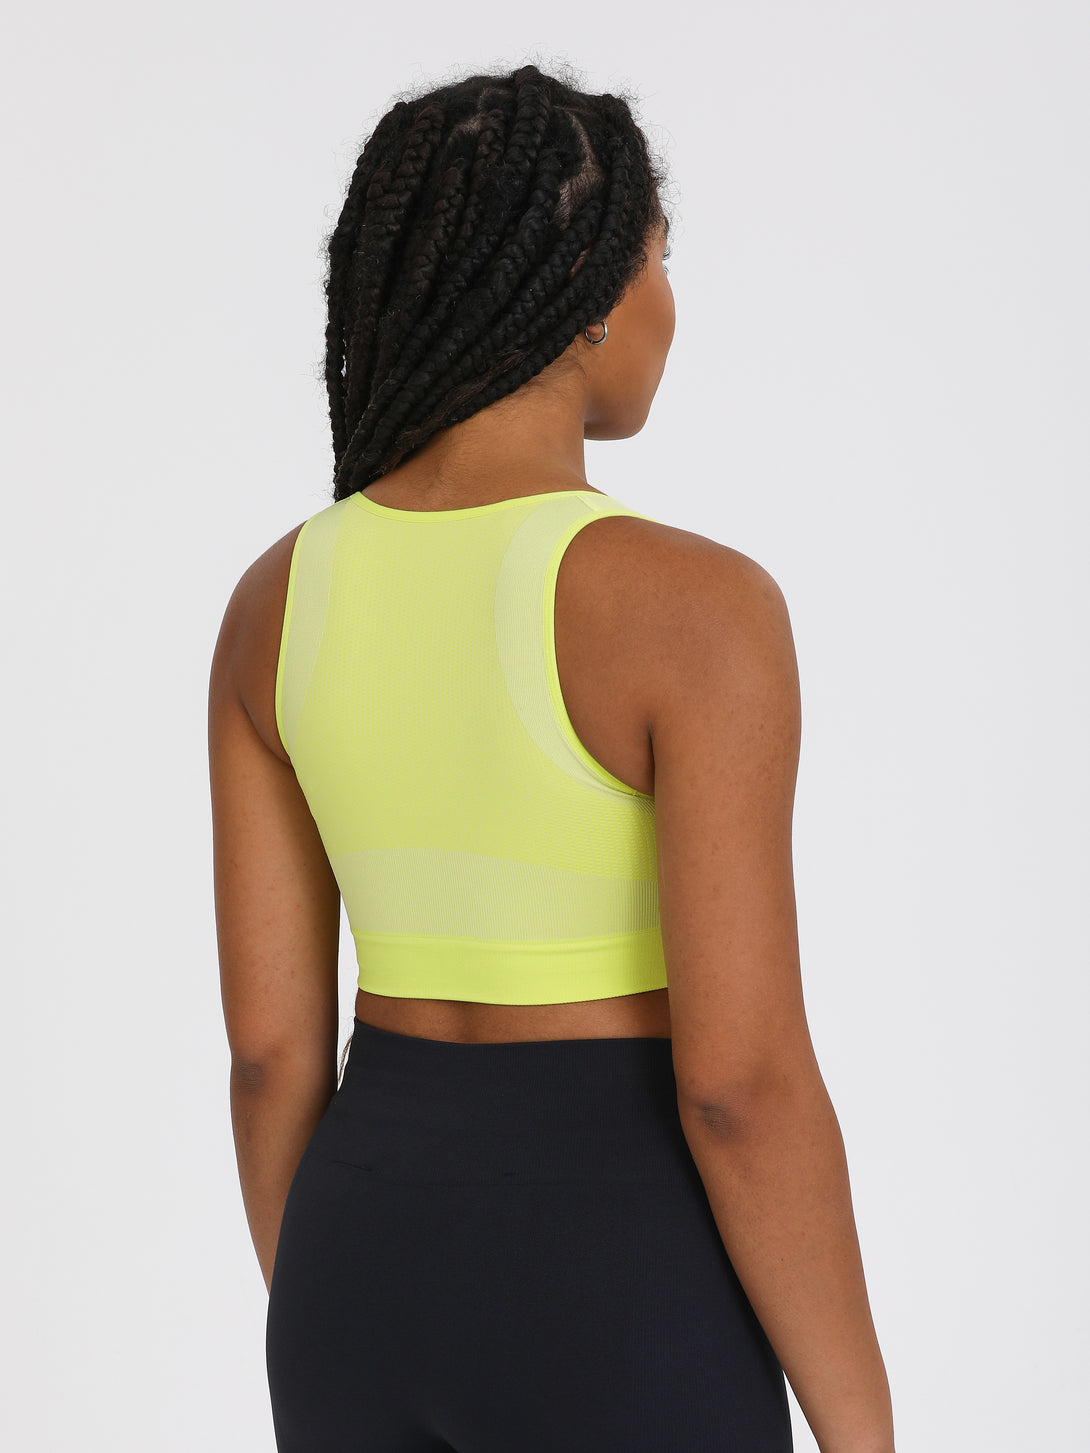 A Woman Wearing Lime Color High Impact Sports Bra